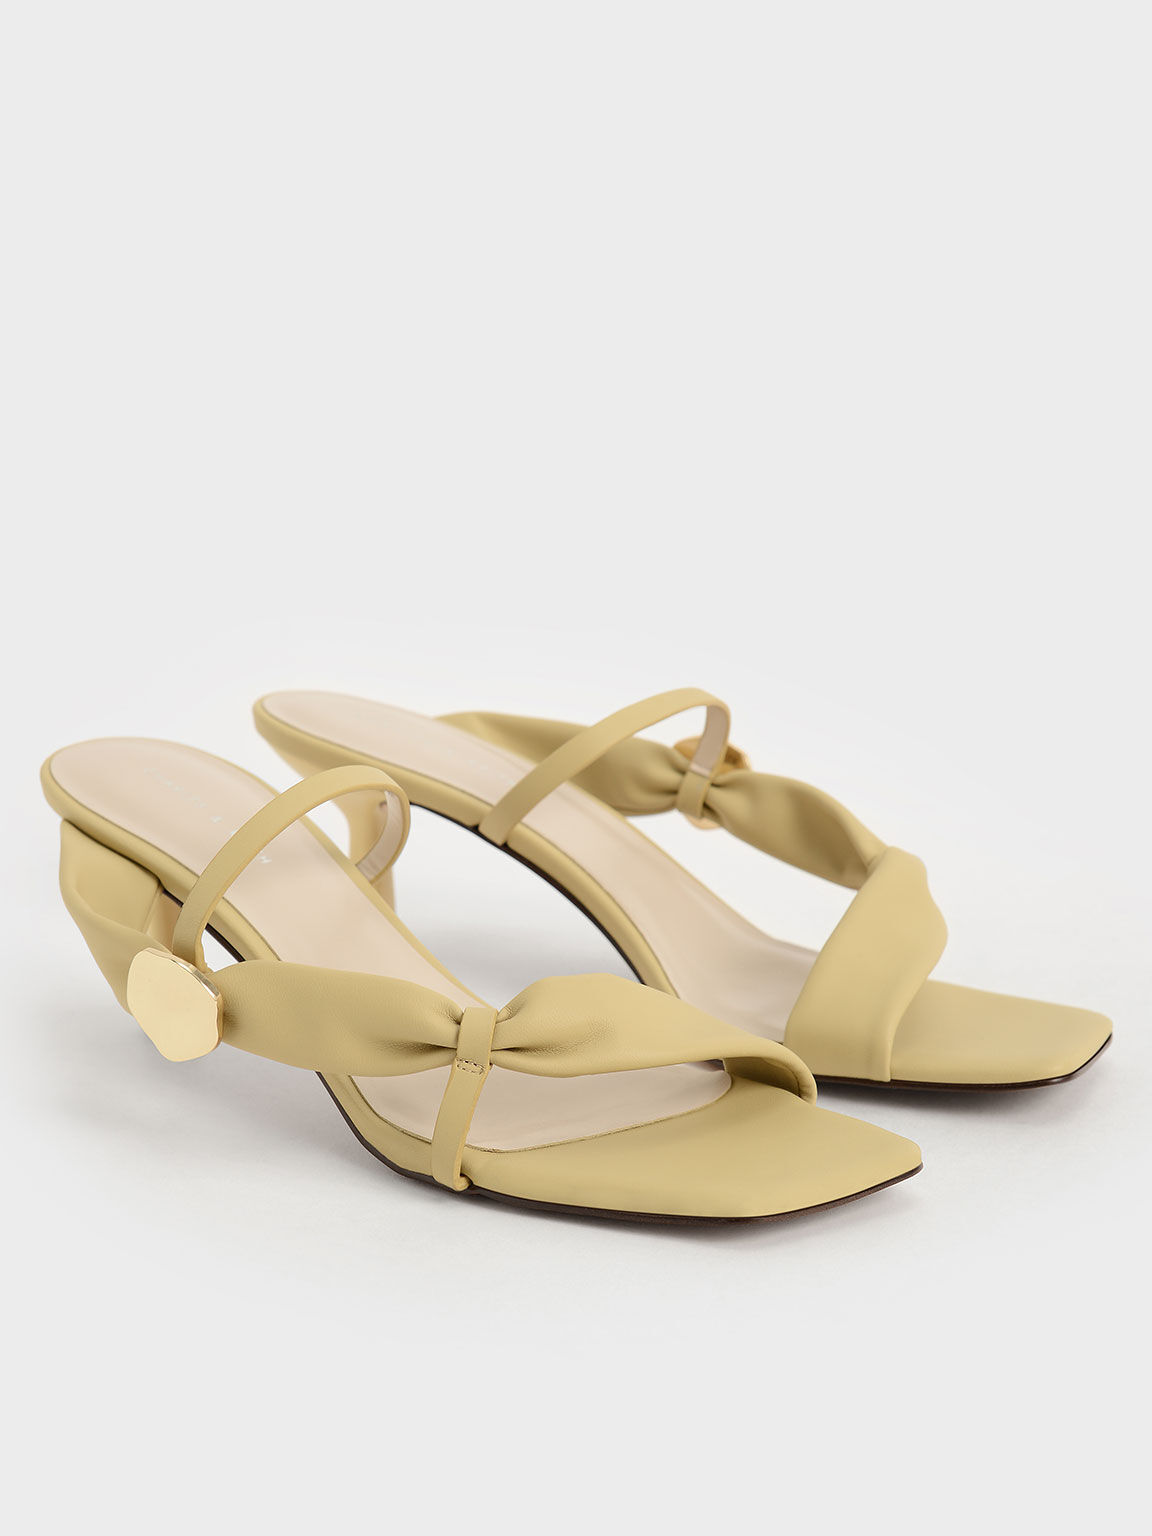 Sandal Mules Embellished Puffy Strap, Yellow, hi-res